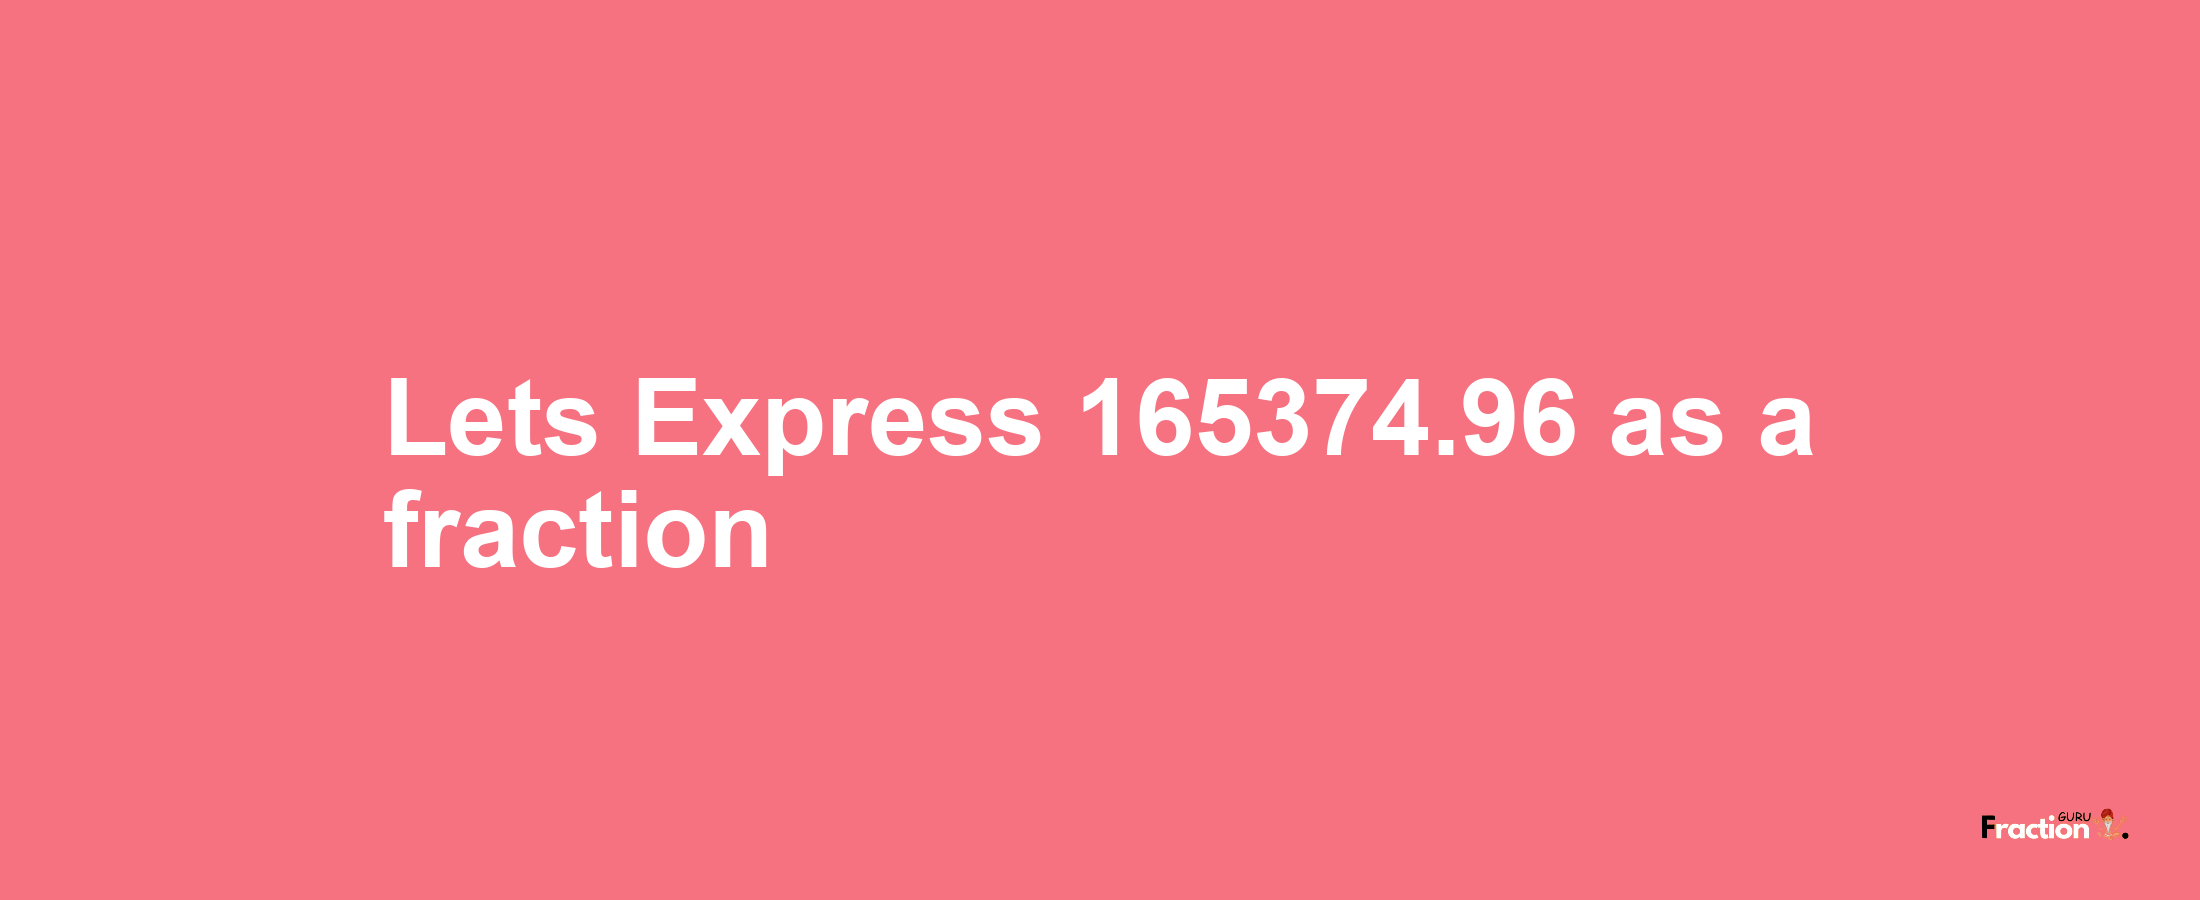 Lets Express 165374.96 as afraction